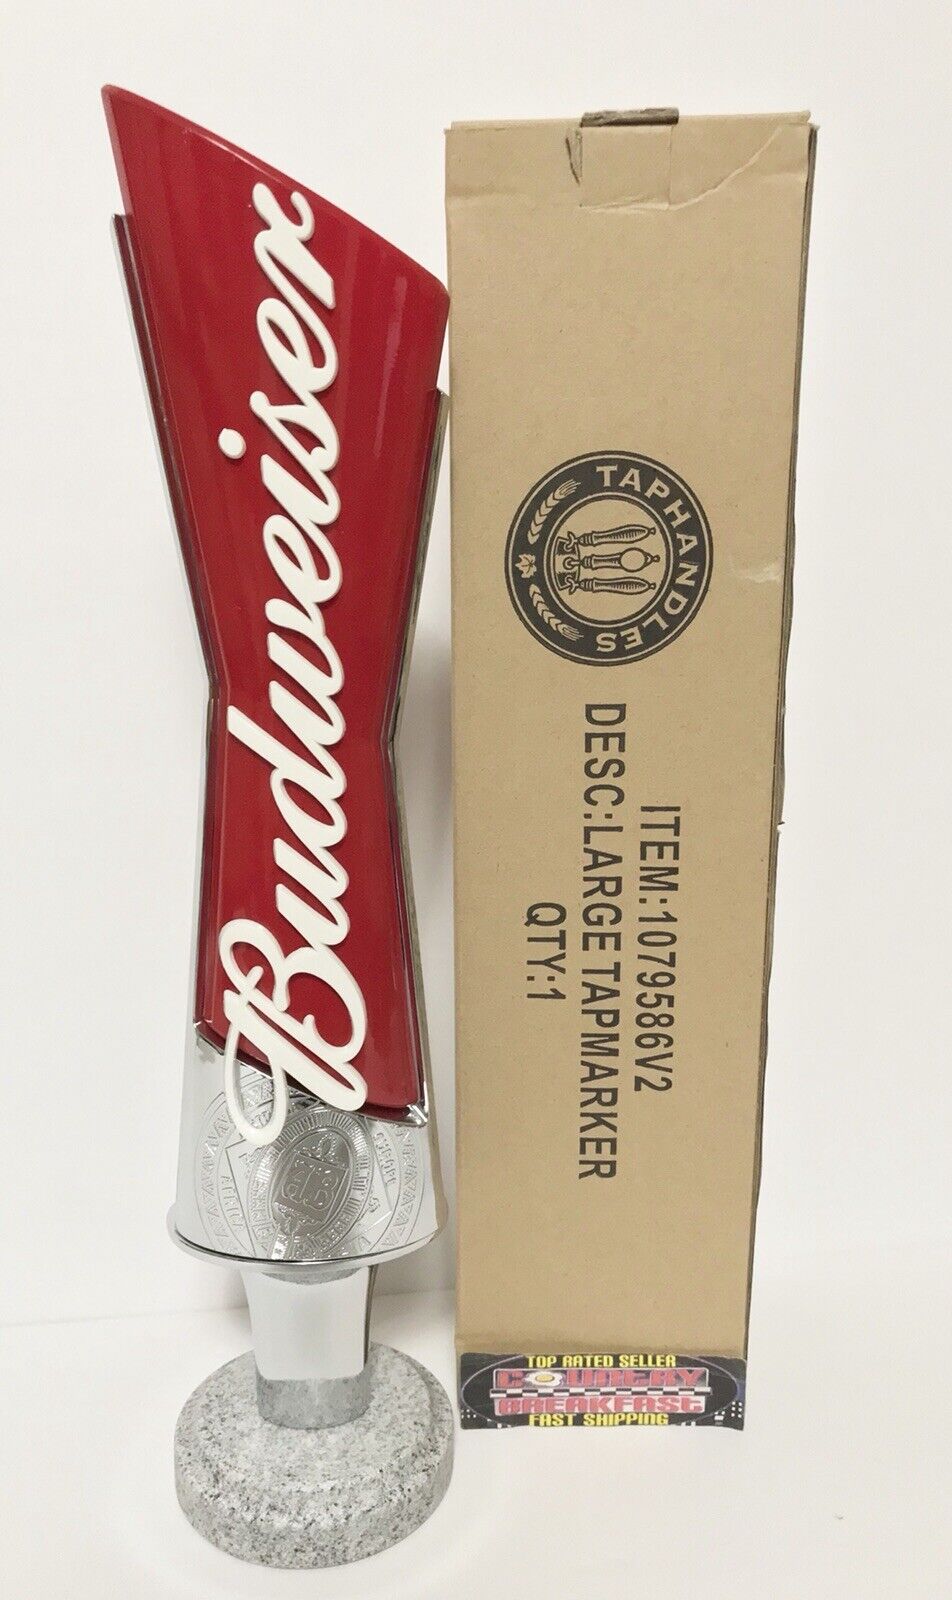 Budweiser Bowtie Logo Beer Tap Handle 13” Tall - Brand New In Box